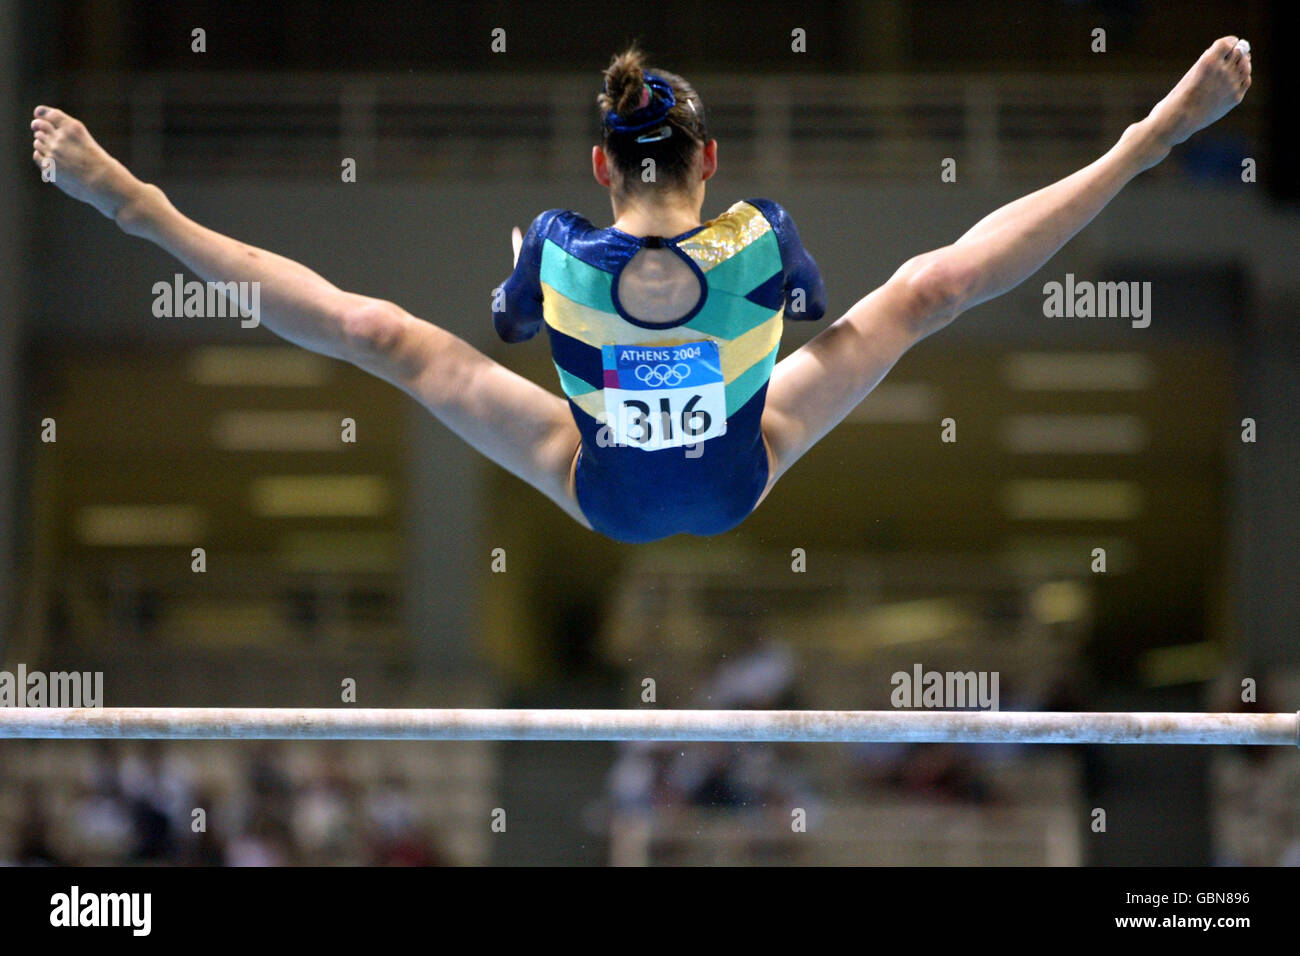 Gymnastics - Athens Olympic Games 2004 - Uneven Bars. Brazil's Lais Souza on the uneven bars Stock Photo